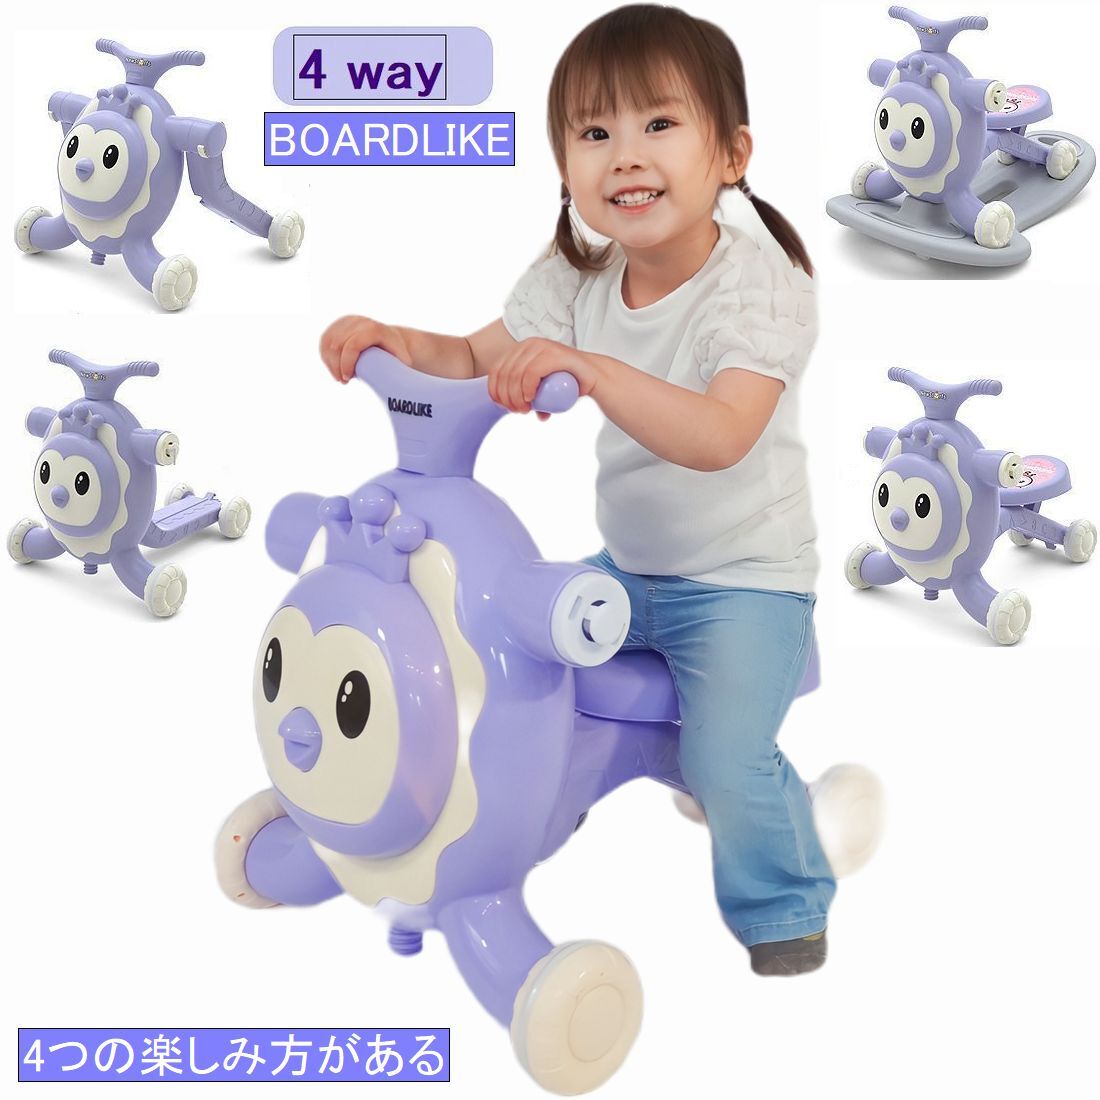  purple #80% off . prompt decision,4WAY# first in Japan #10 pcs limit # baby-walker # baby War car # board Like # scooter # rocking chair -# wooden horse 